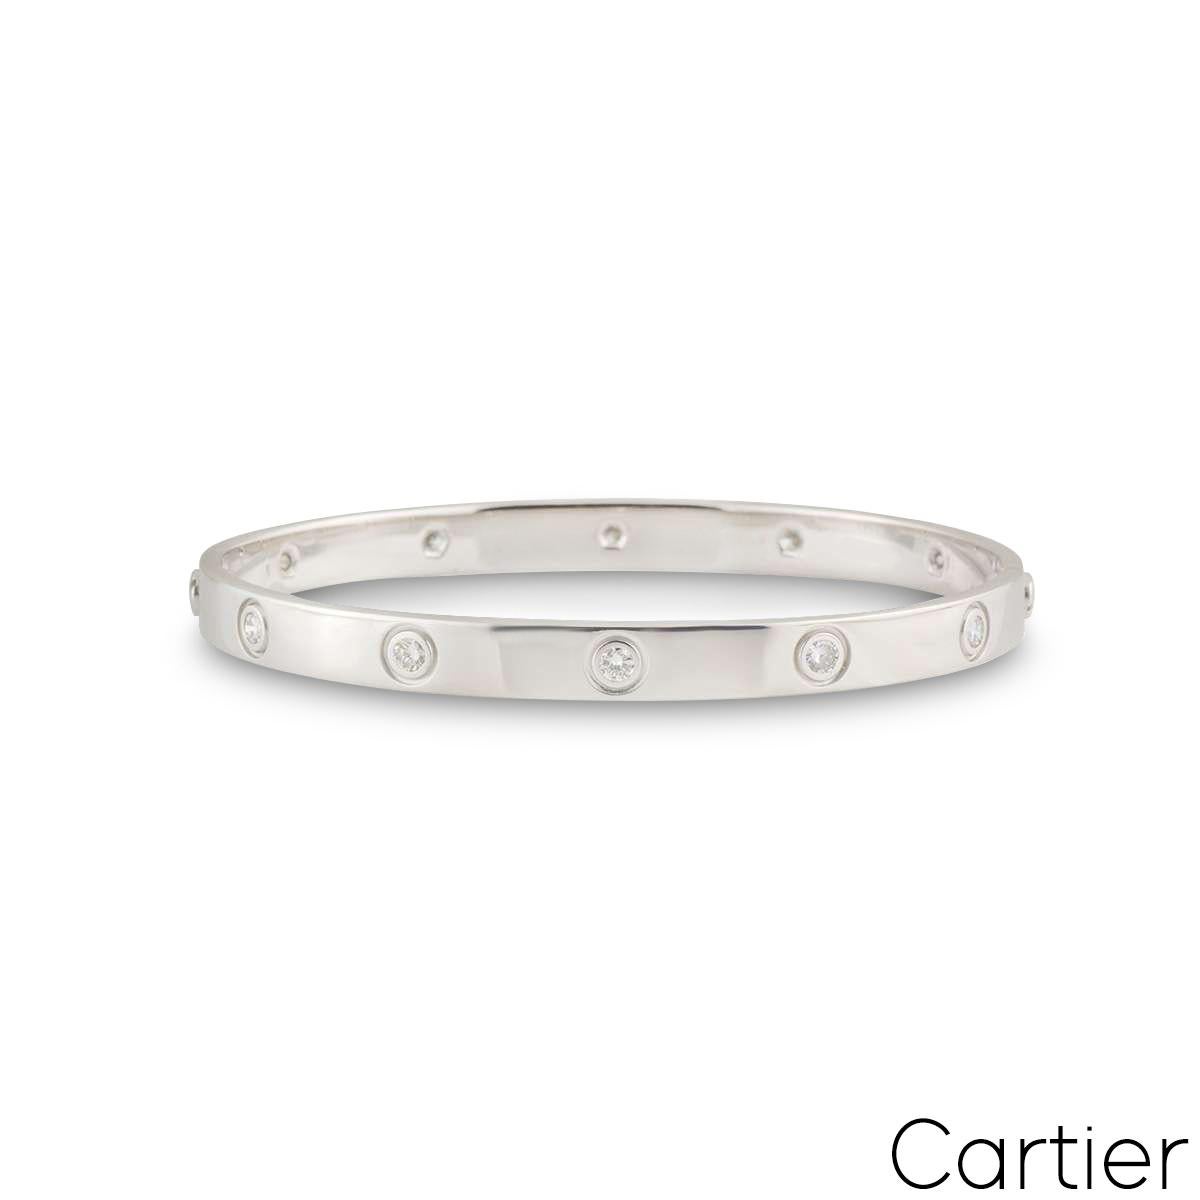 An 18k white gold full diamond Cartier bracelet from the Love collection. The bracelet is set with 10 round brilliant cut diamonds circulating the outer edge throughout in a rubover setting. The bracelet is size 17 and features the old style screw